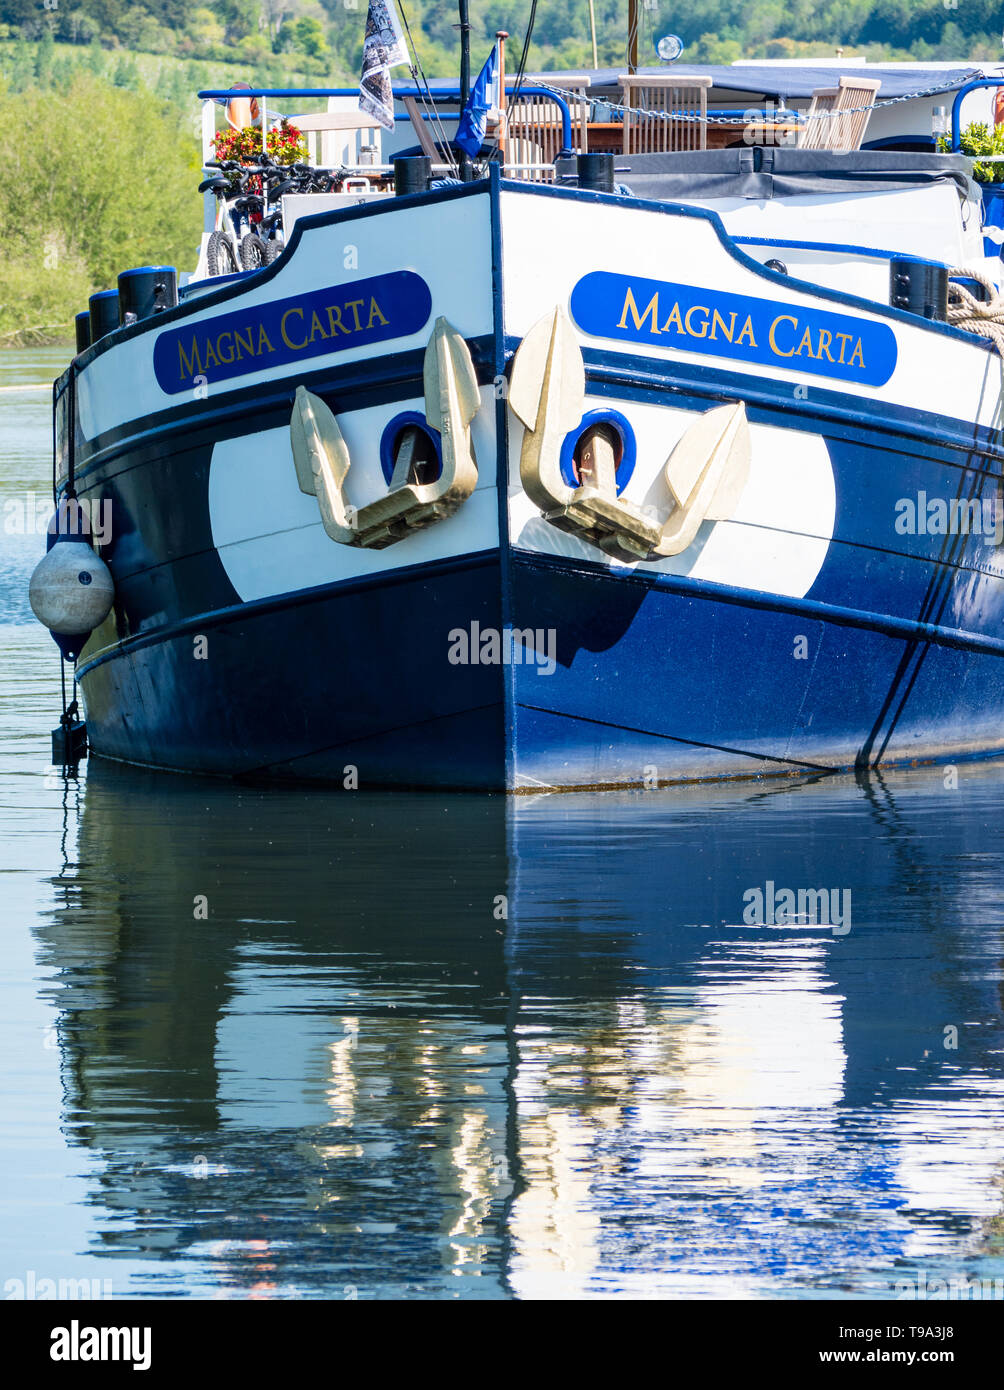 Magna Carta Boat, on River Thames, nr Henley-on-Thames, Oxfordshire, England, UK, GB. Stock Photo